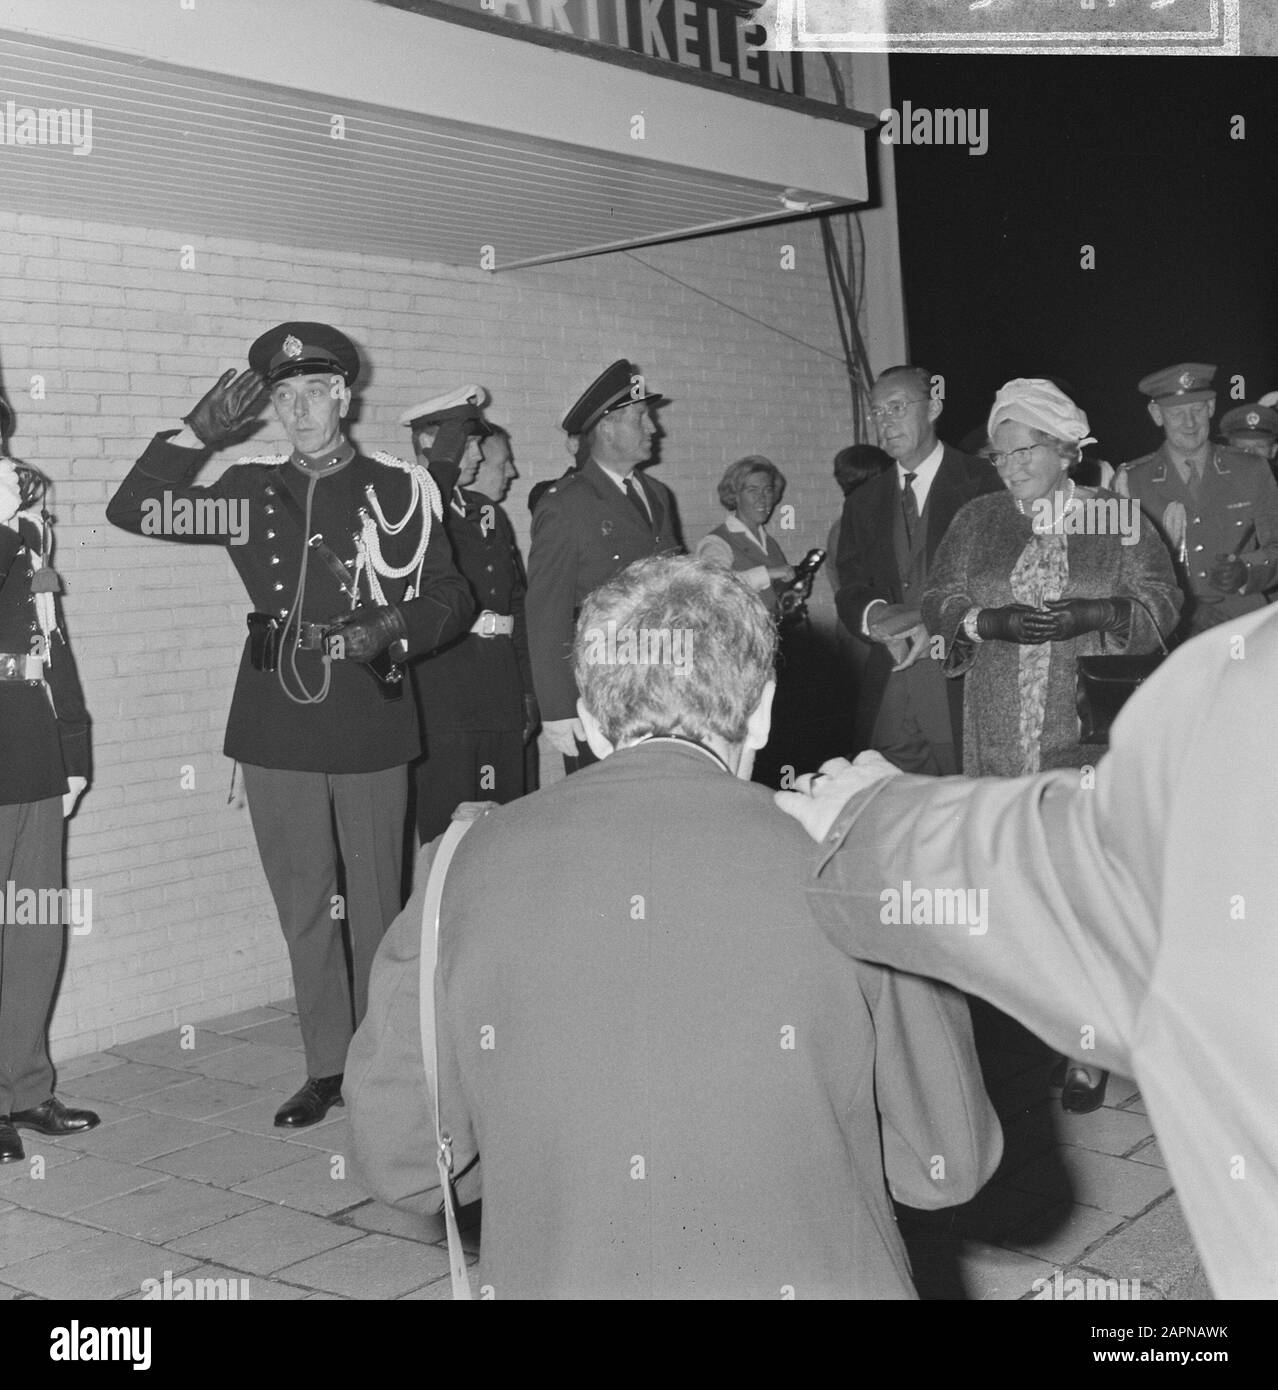 Queen Juliana and Prince Bernhard during their arrival at Schiphol Airport after a royal visit to Suriname  Queen Juliana and Prince Bernhard as they are welcomed Date: 16 October 1965 Location: North Holland, Schiphol Keywords: greetings, queens, princes, uniforms Personal name: Bernhard (prince Netherlands), Juliana (queen Netherlands) Stock Photo